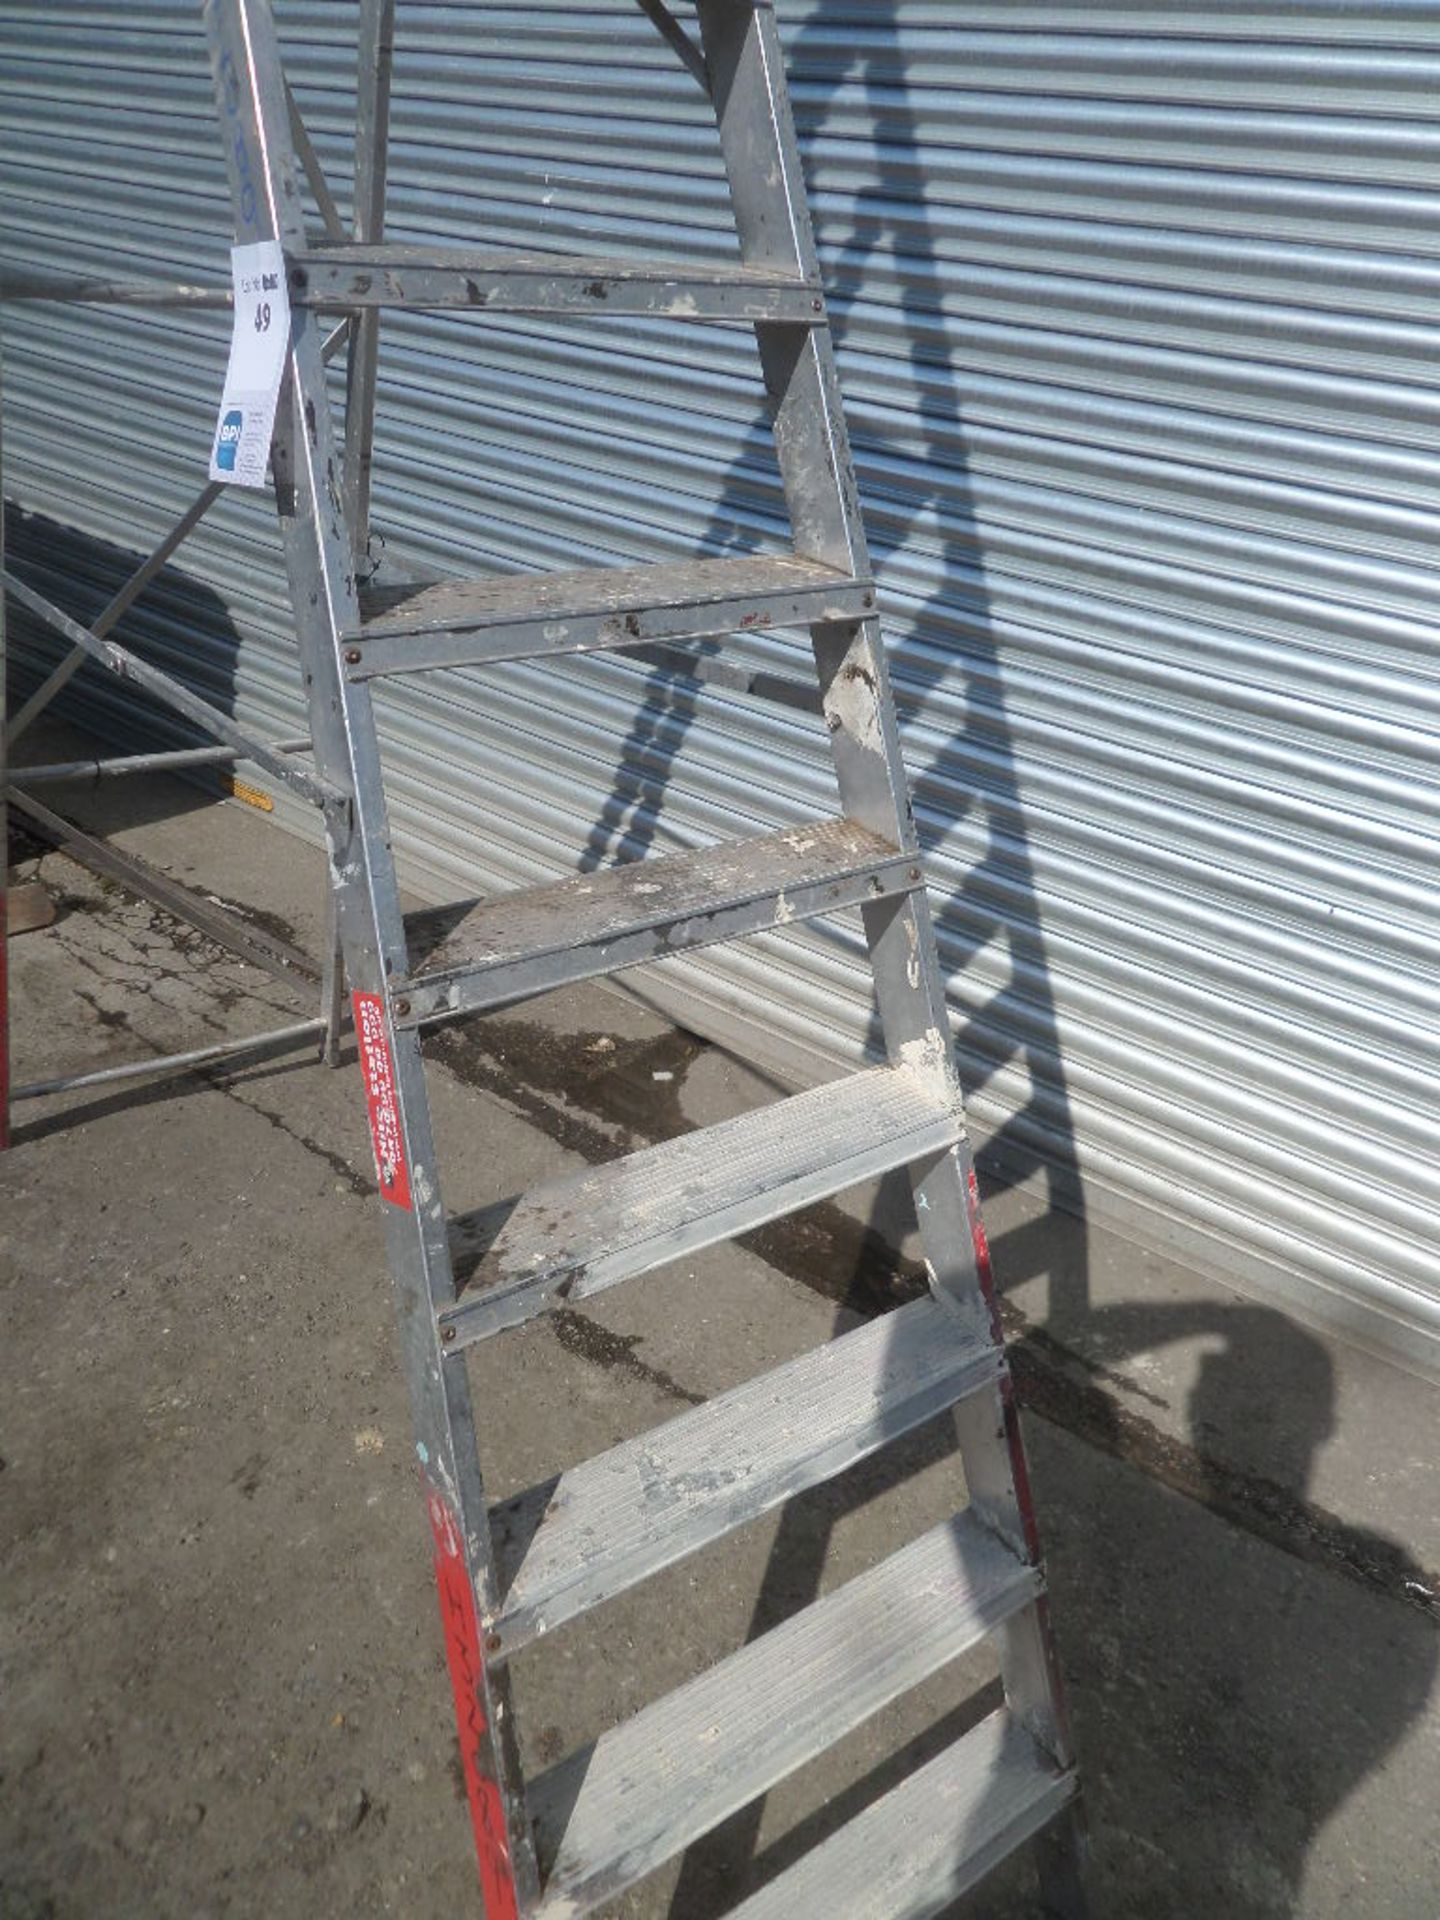 UNKNOWN  {026671} ALLOY STEP LADDER - 10 tread Platform height is 210cm - Working fine. - Image 2 of 2